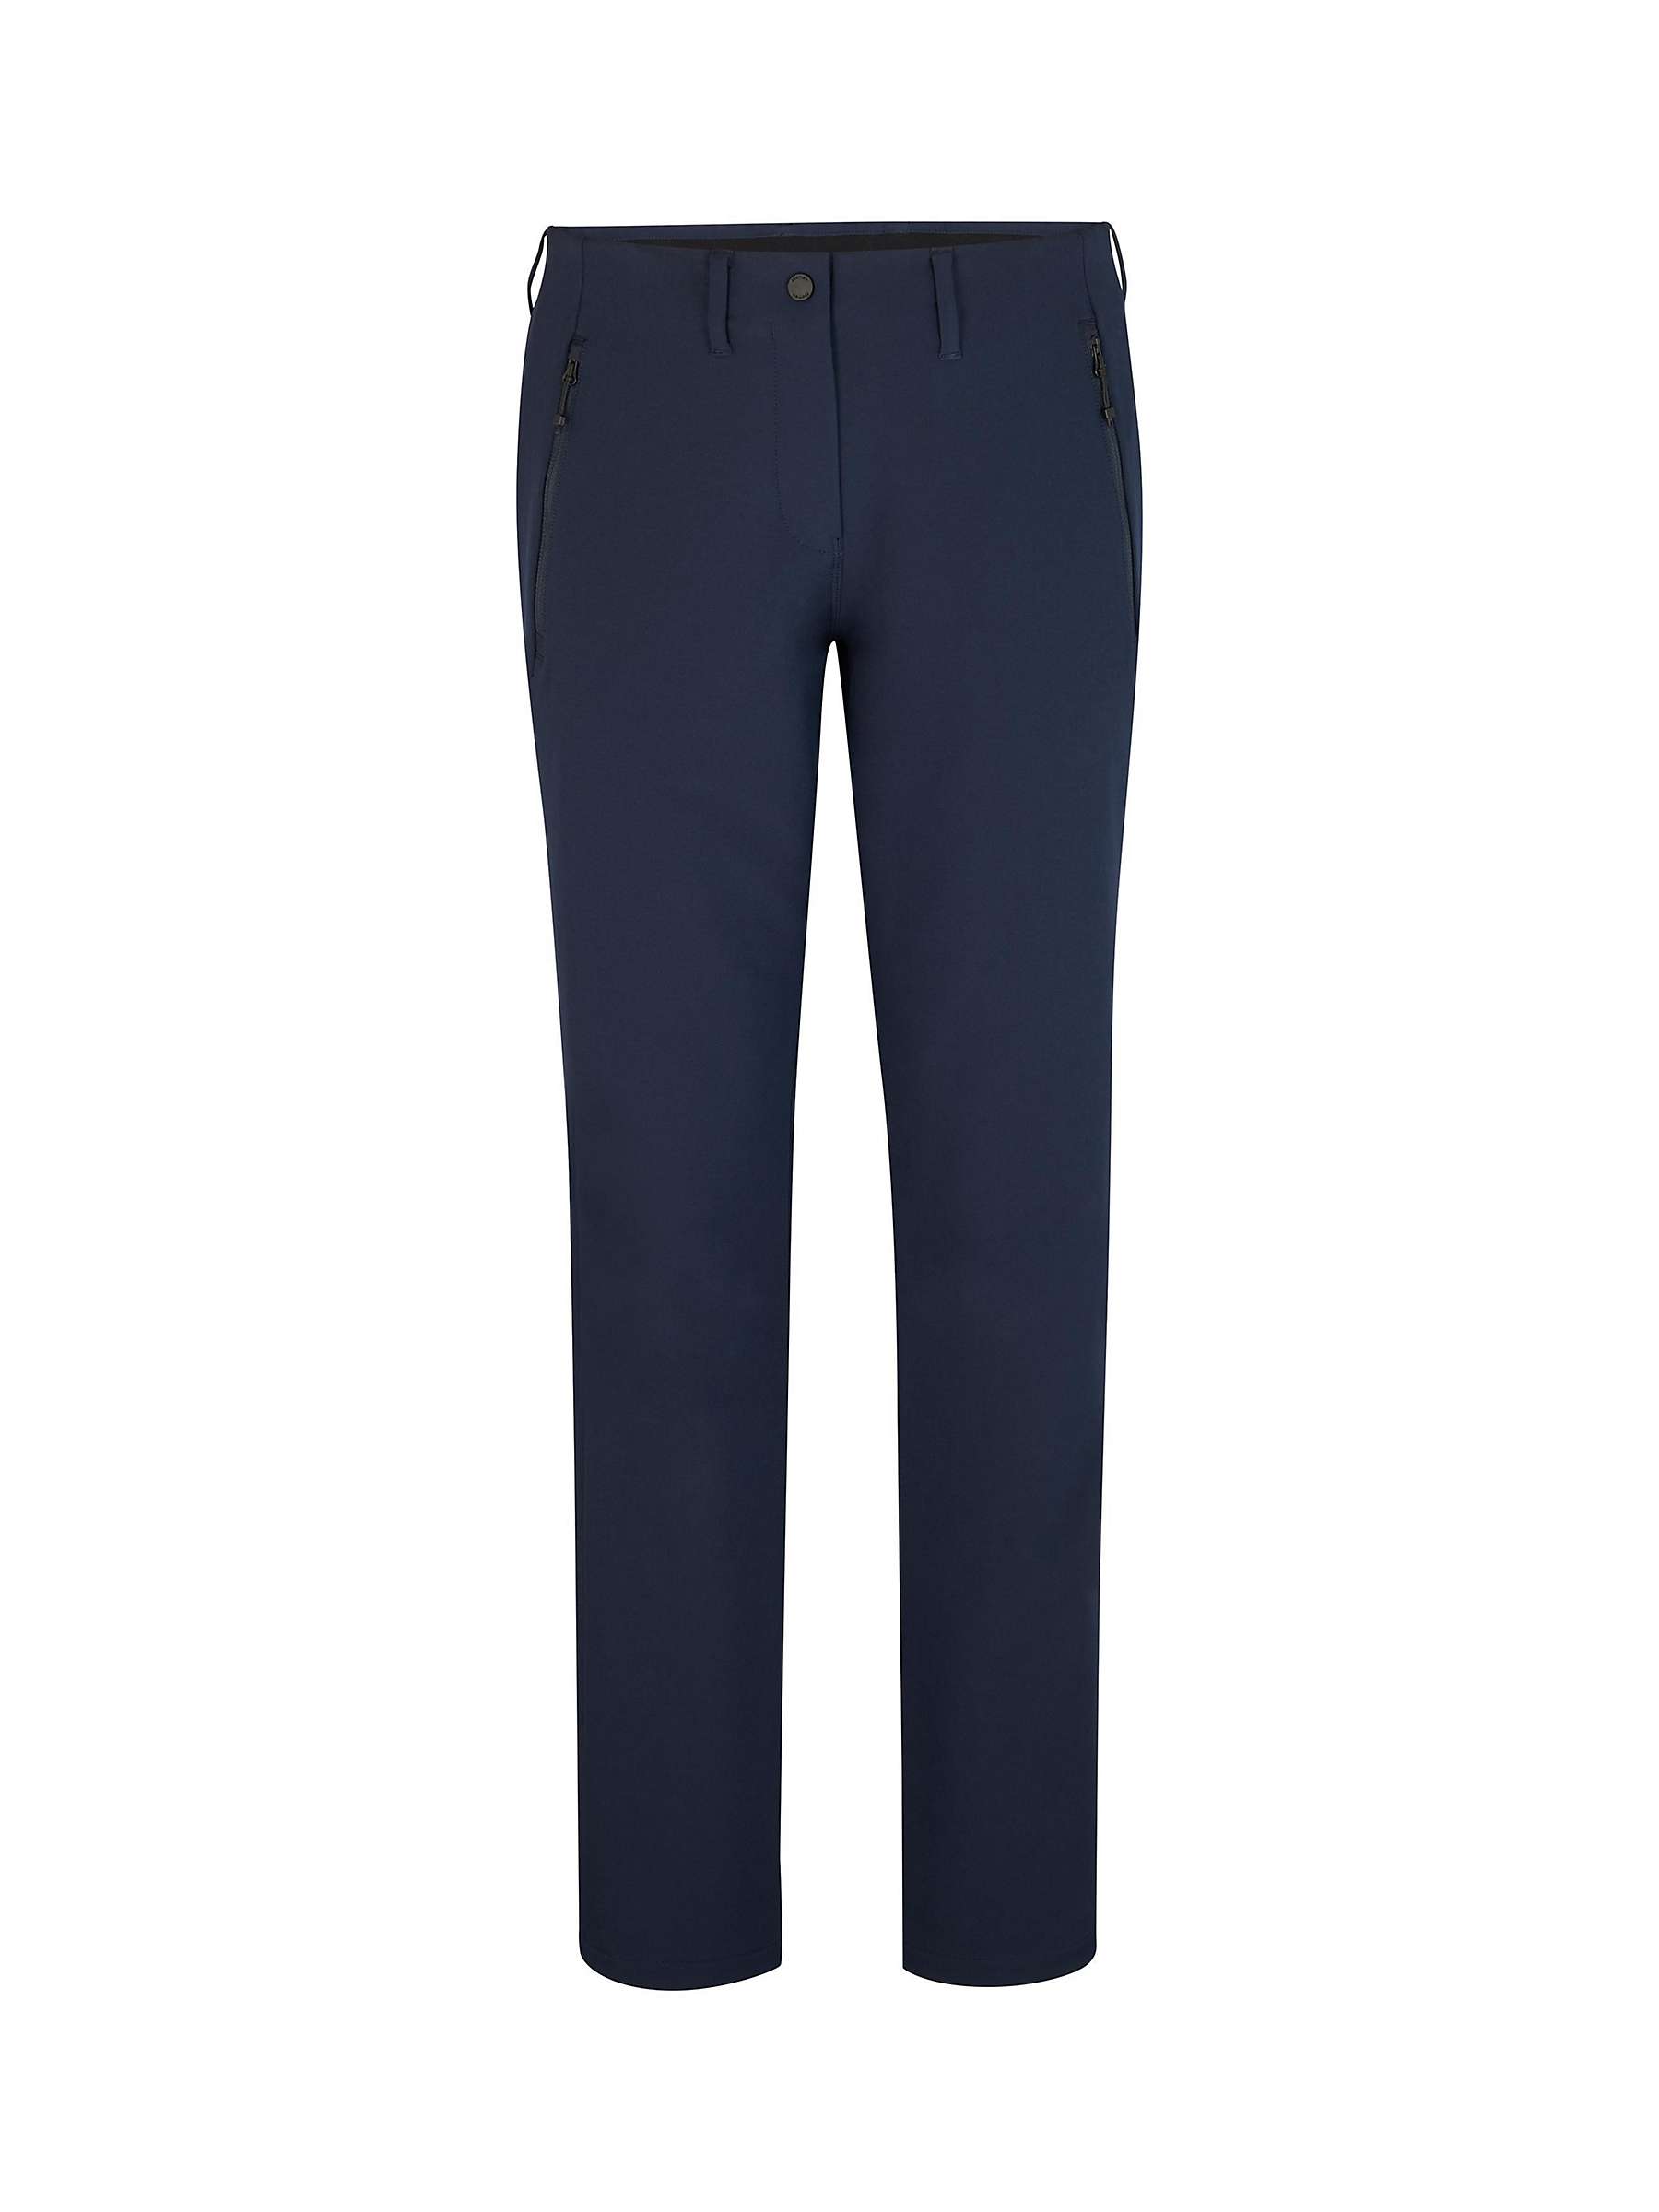 Rohan Striders Women's Hiking Trousers, True Navy at John Lewis & Partners